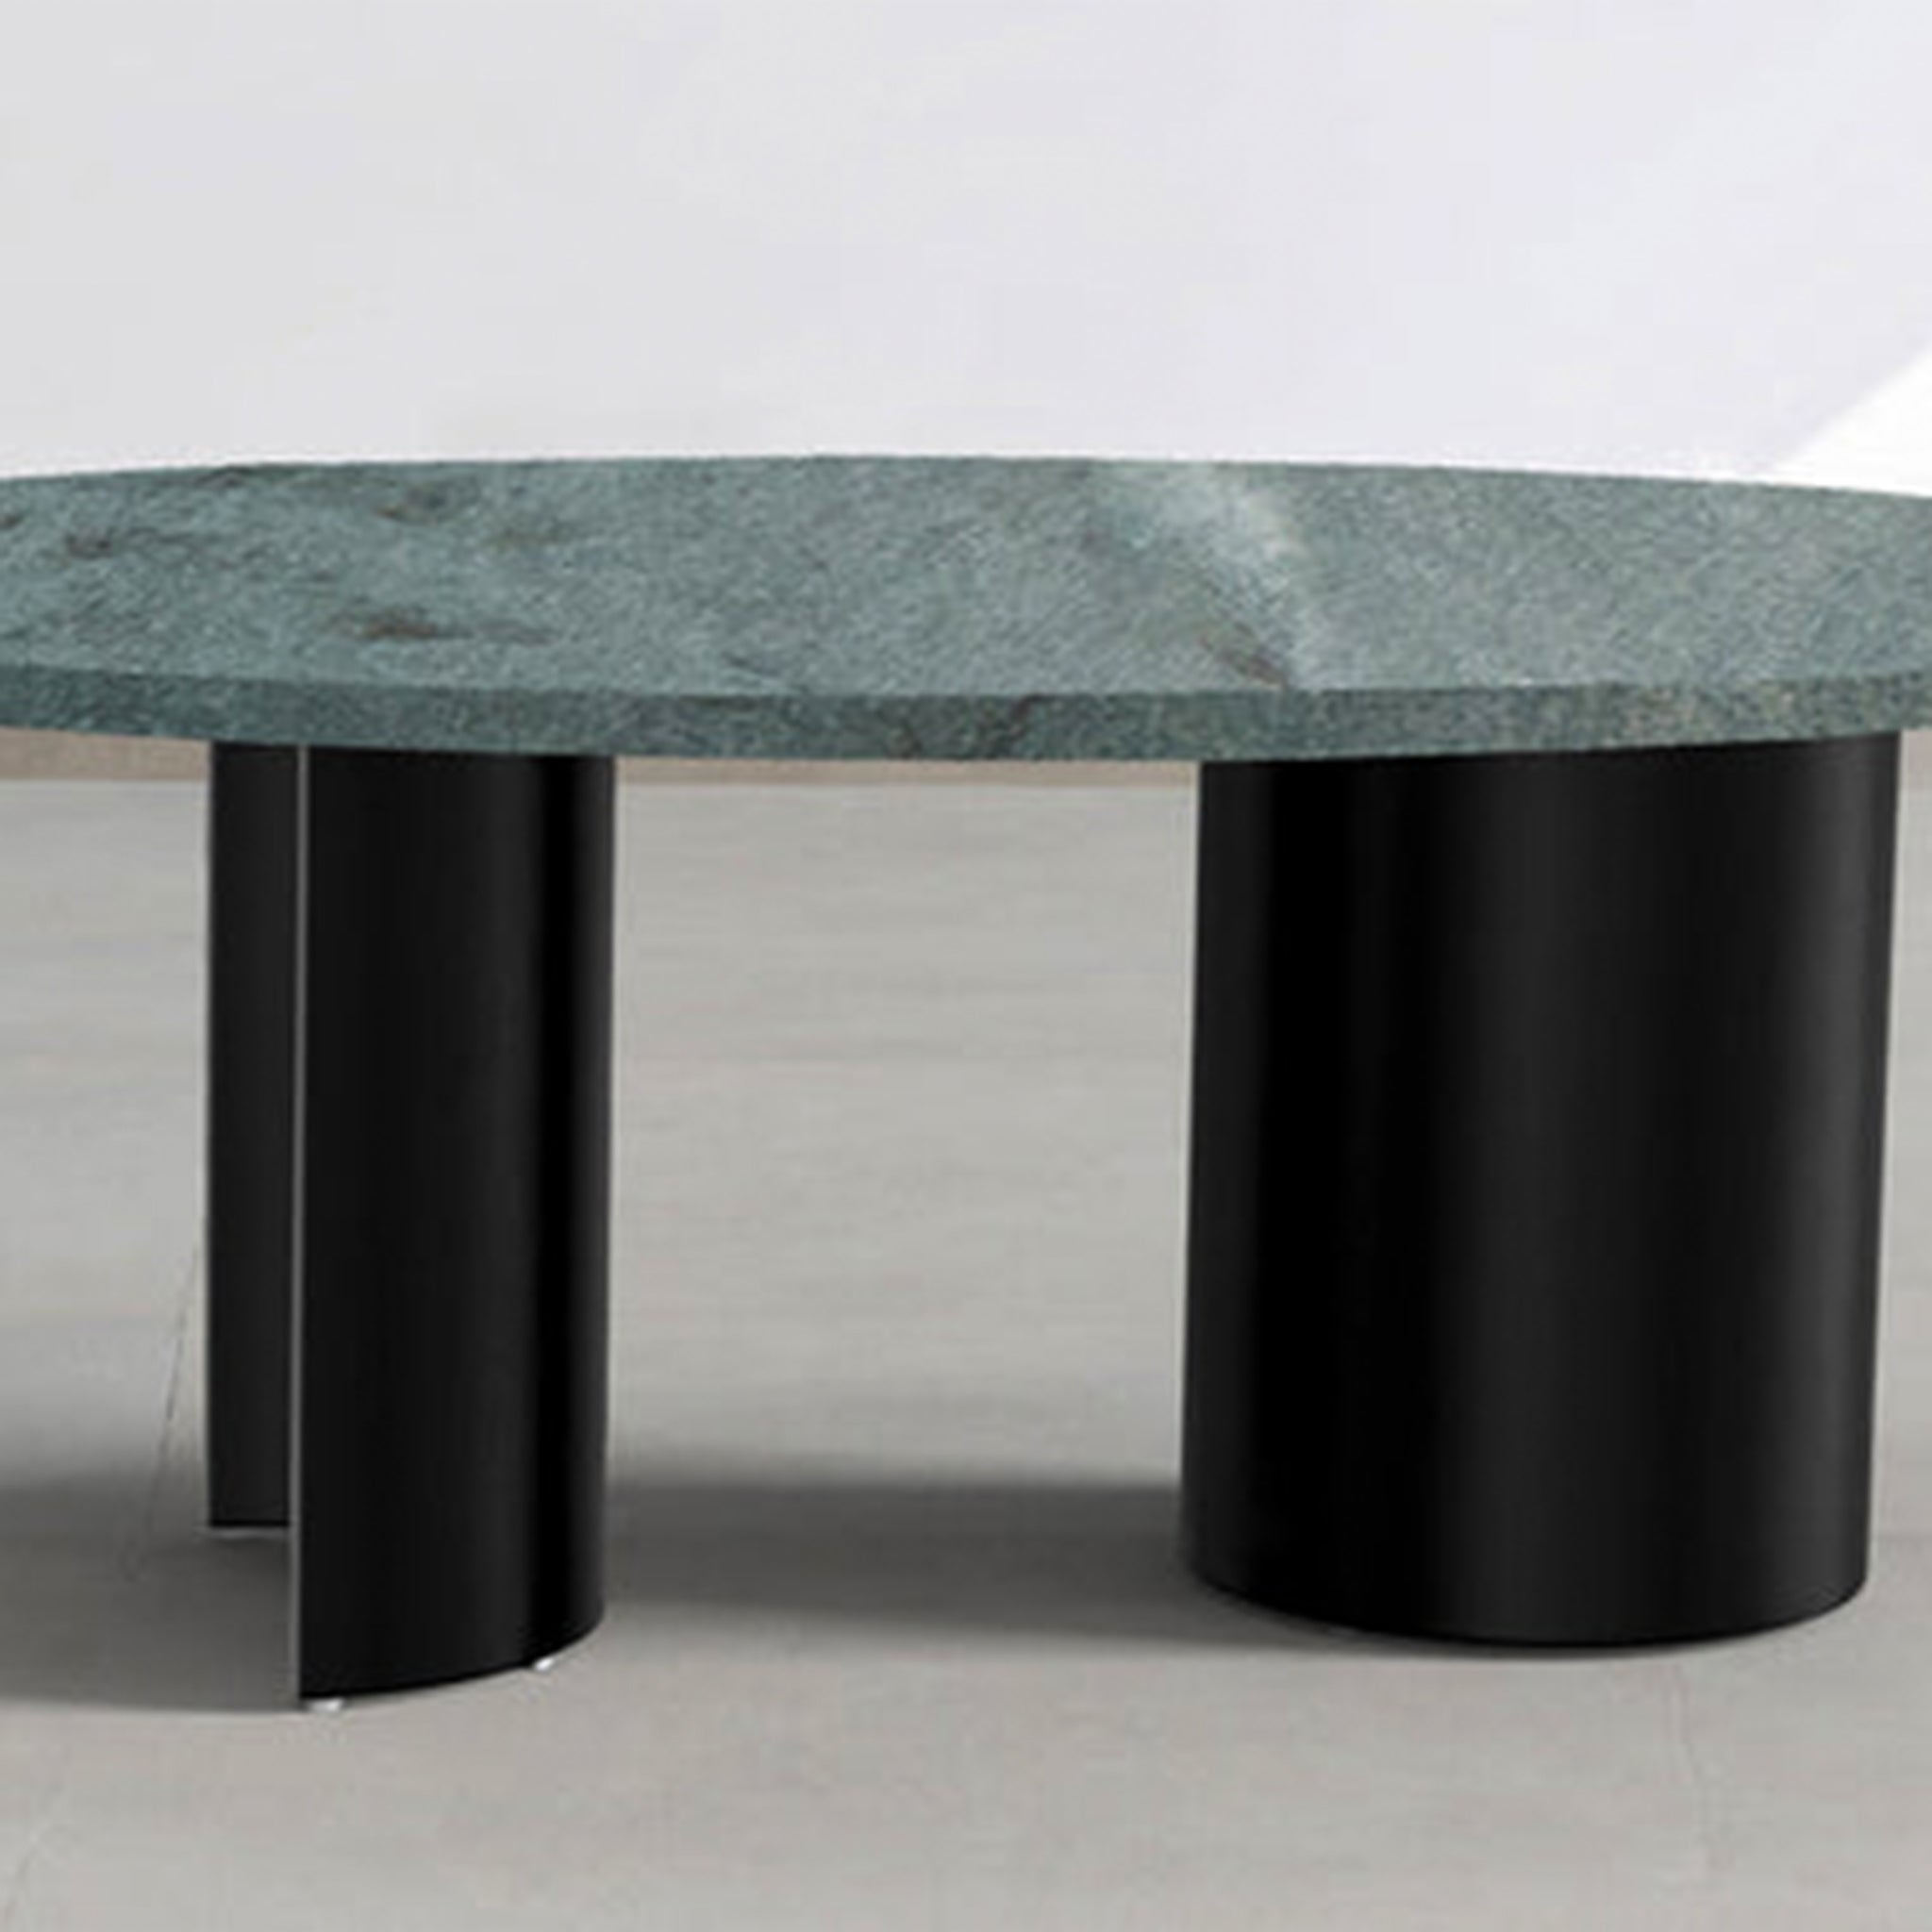 Diameter 100cm Coffee Table: Ideal size for displaying decorative items.